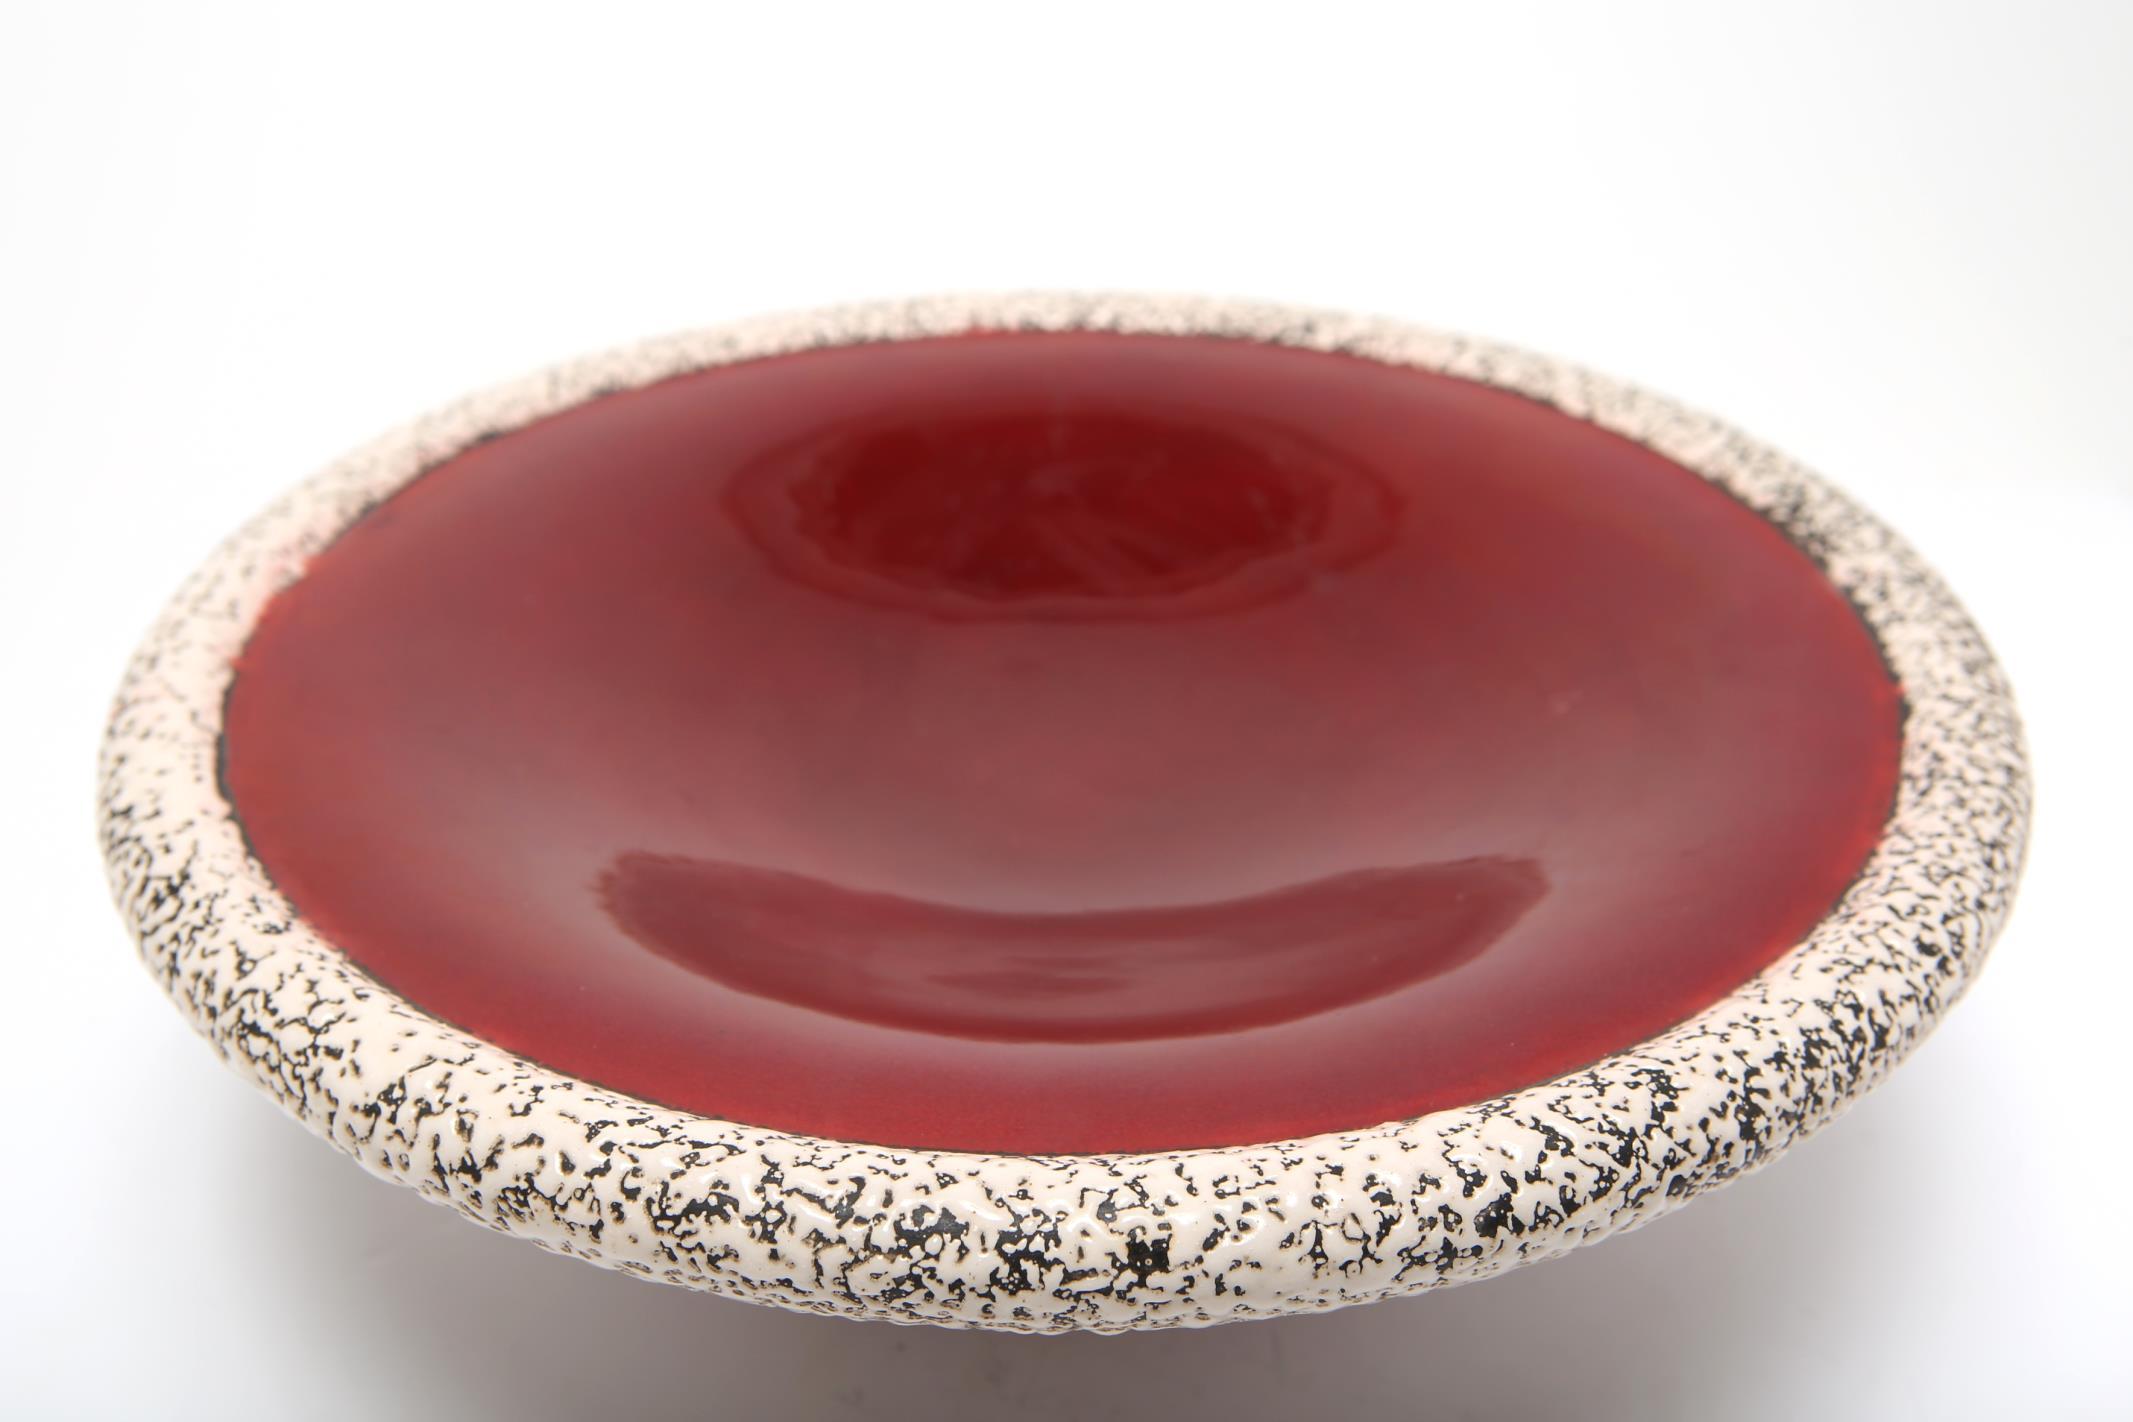 French Art Deco Sevres ceramic compote or table centerpiece designed by Paul Milet in the 1930s. The piece has oxblood red and anthracite gray glazes and a cream enamel 